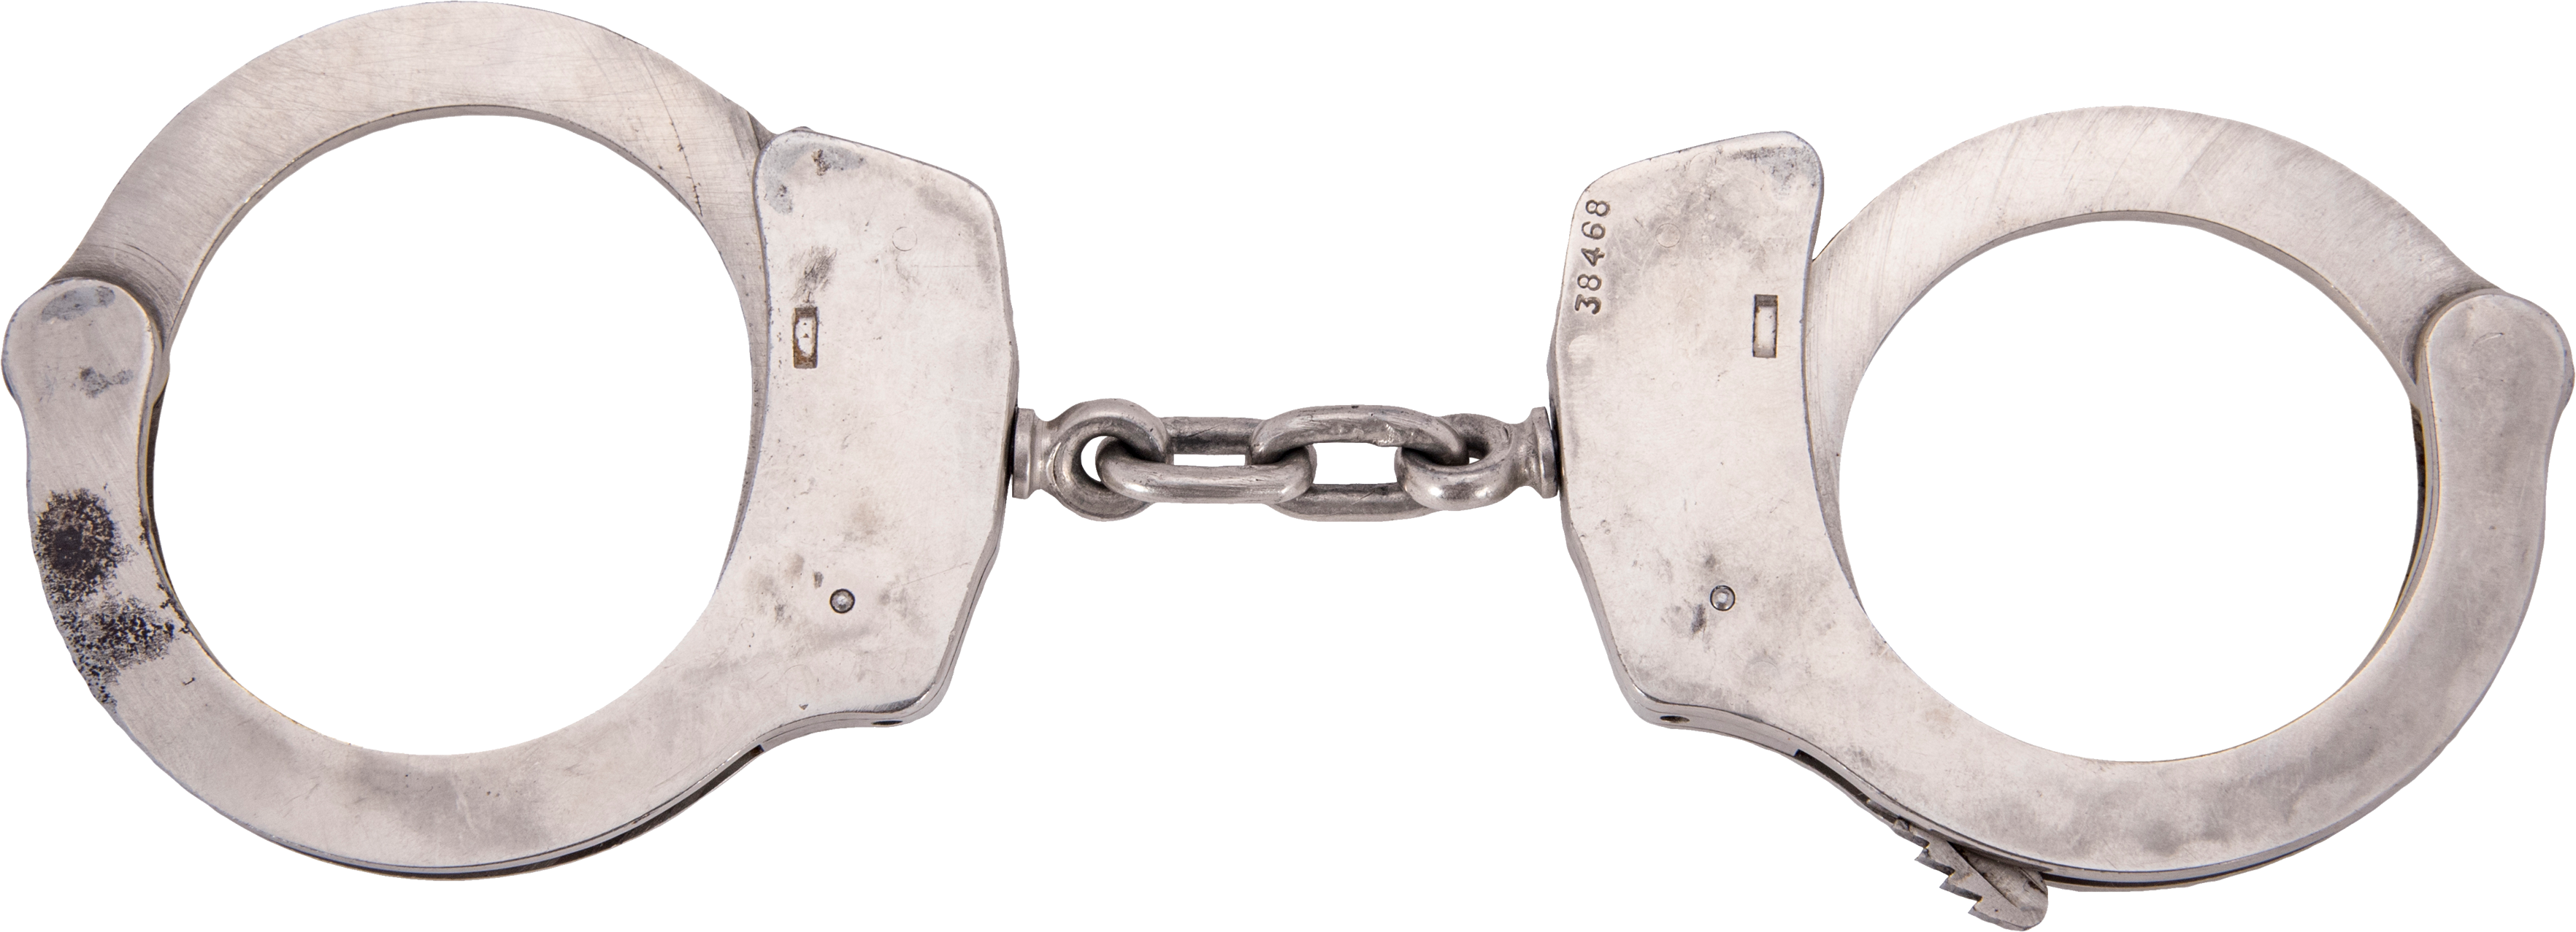 handcuffs png images download crazypngm crazy png images download #29607